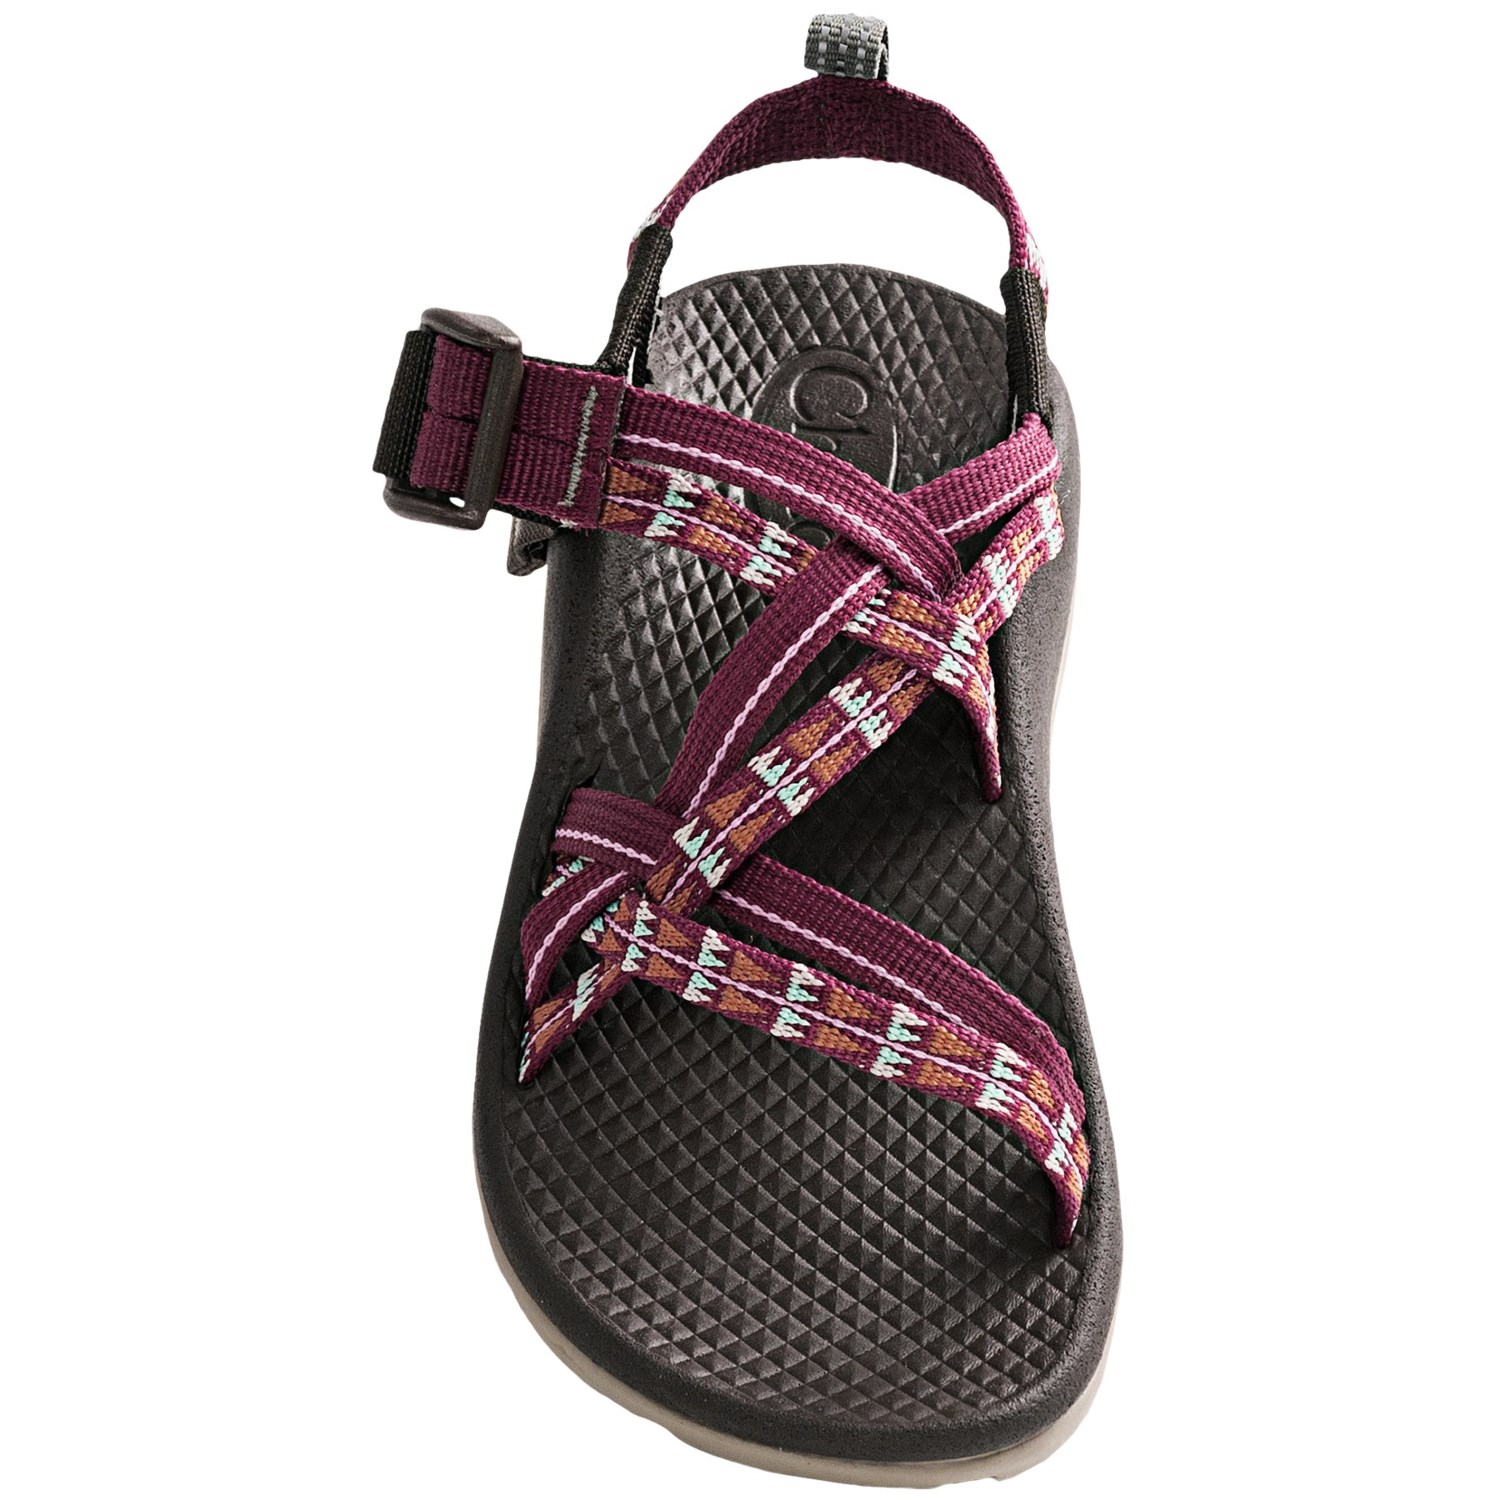 CHACO ZX/1 ECOTREAD SANDALS (For Little and Big Kids) 6509J - Save 54%